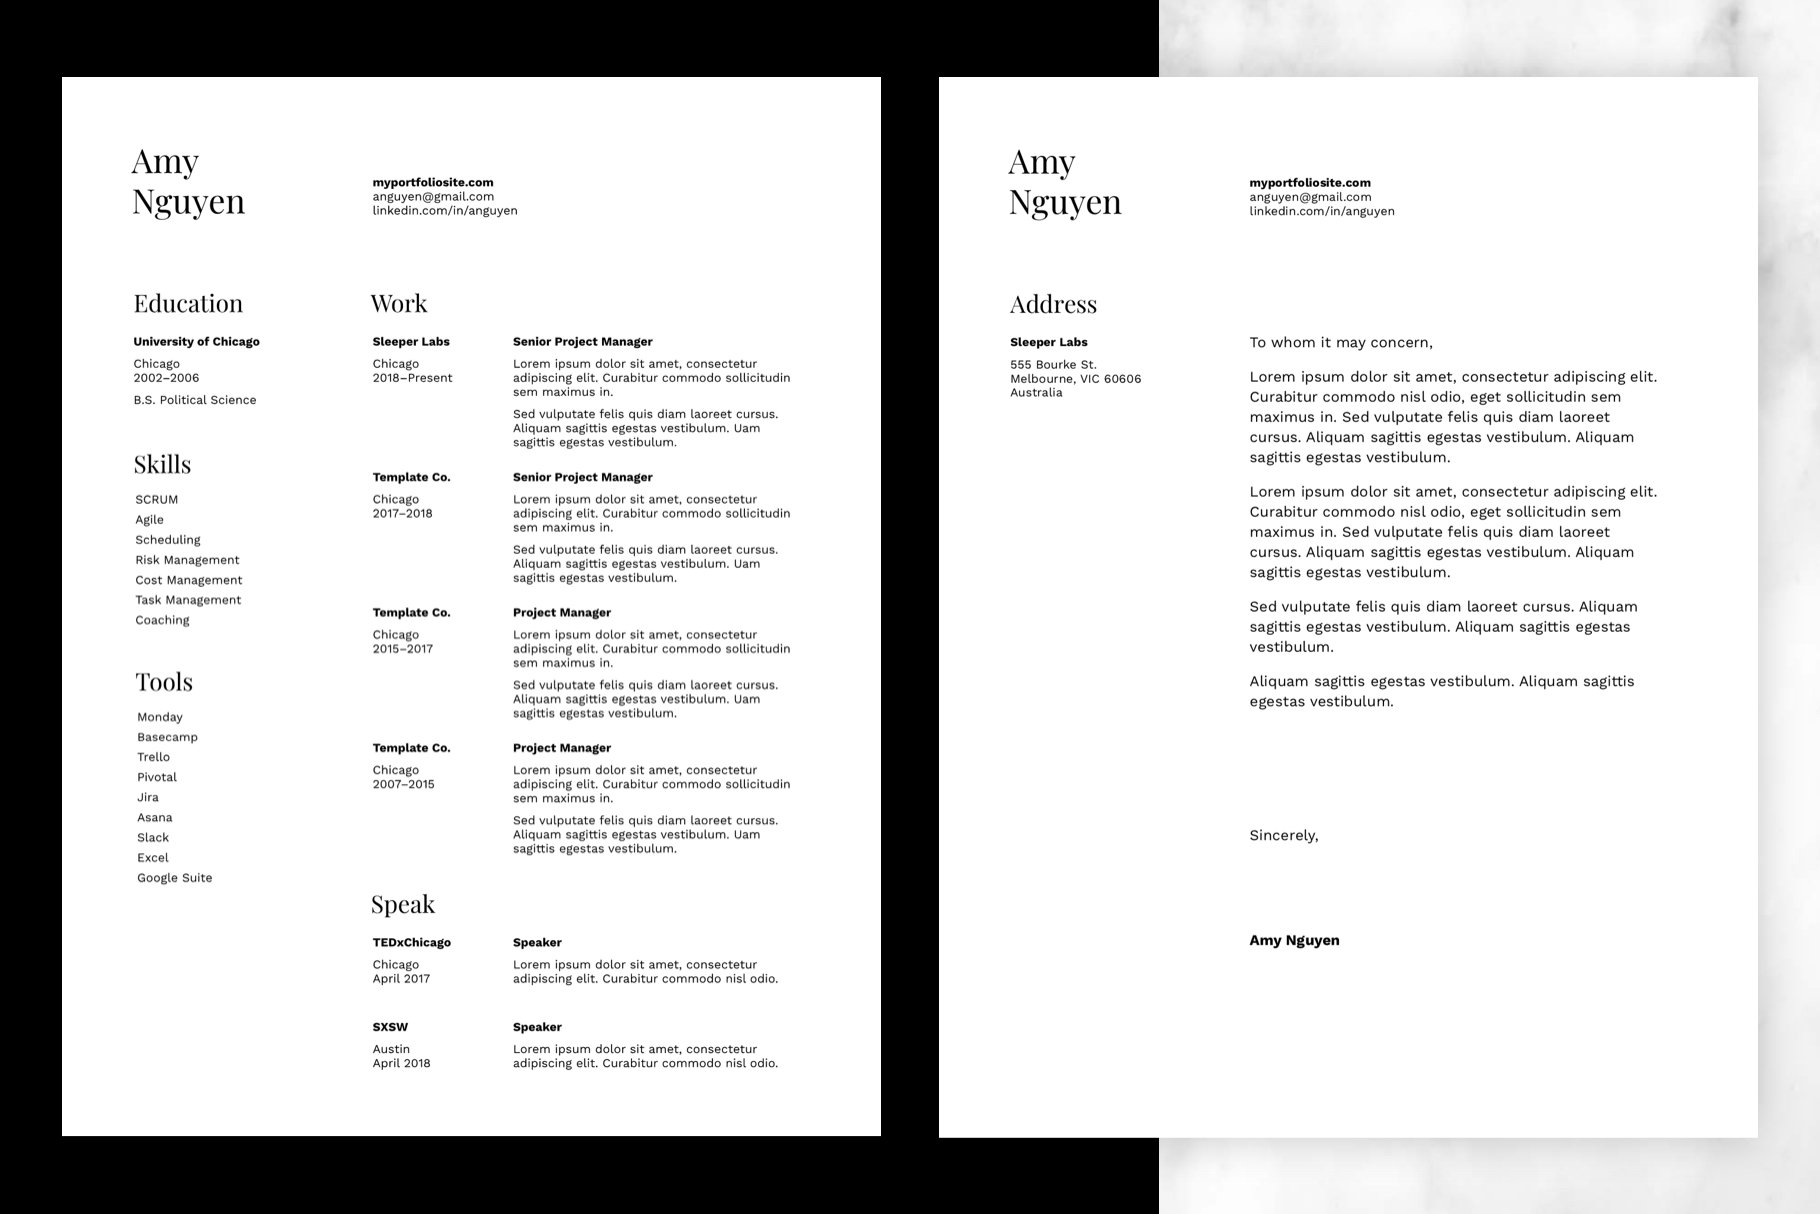 Class - Resume and Cover Letter preview image.